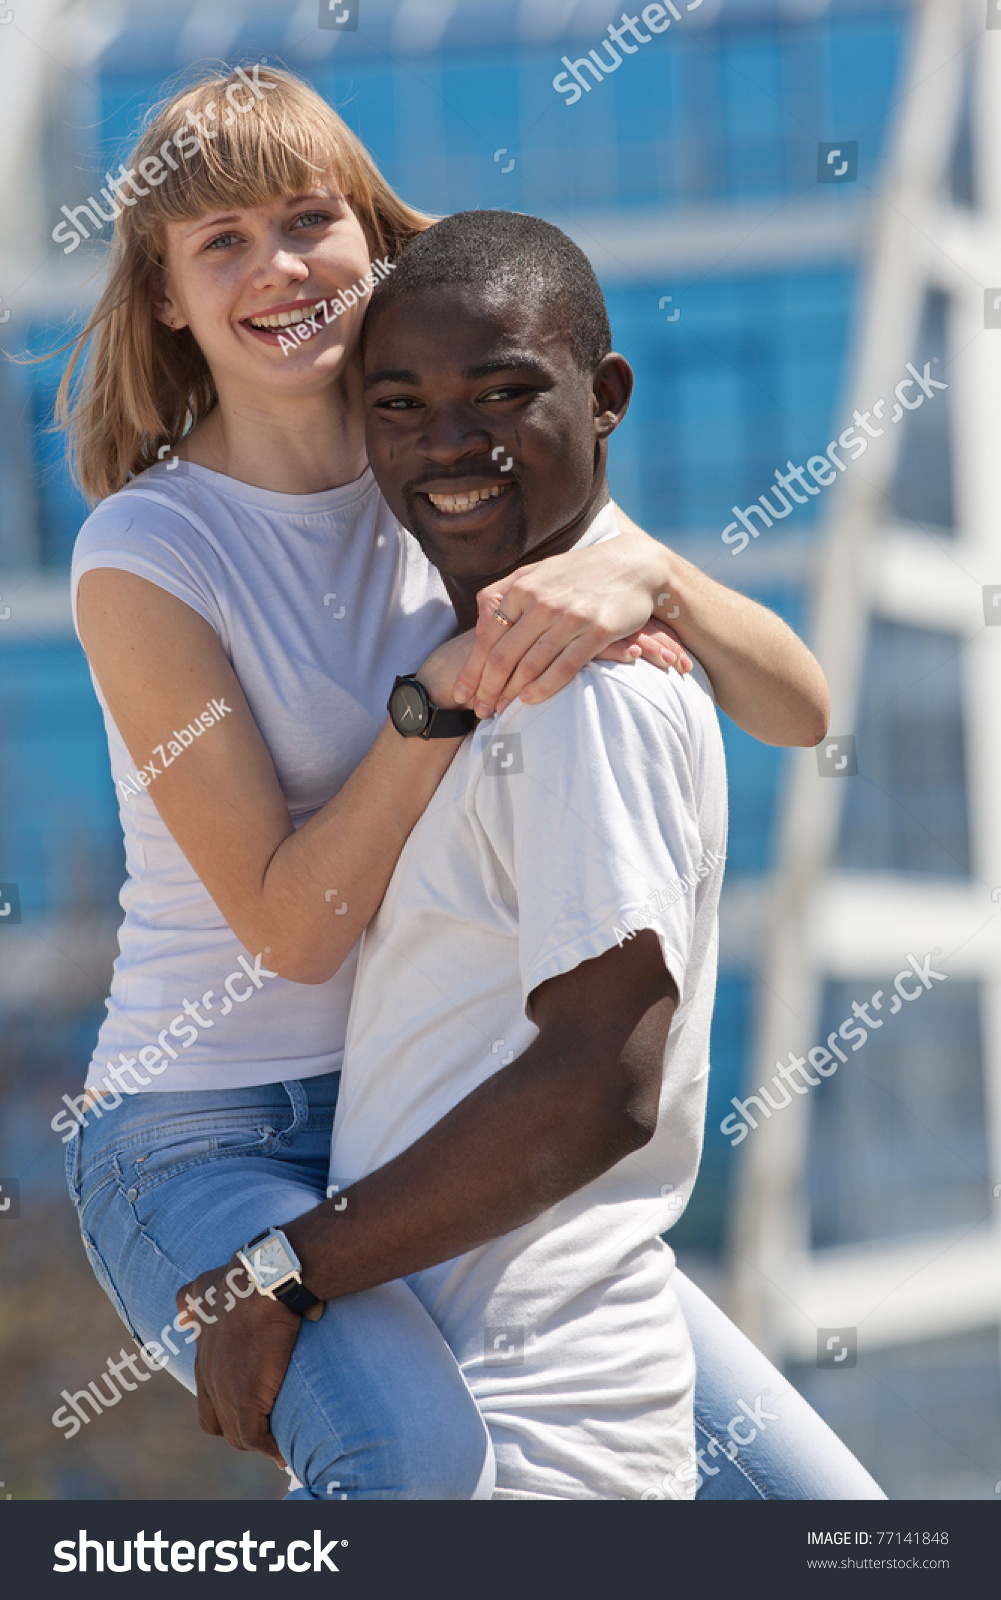 Best of White woman black man pictures